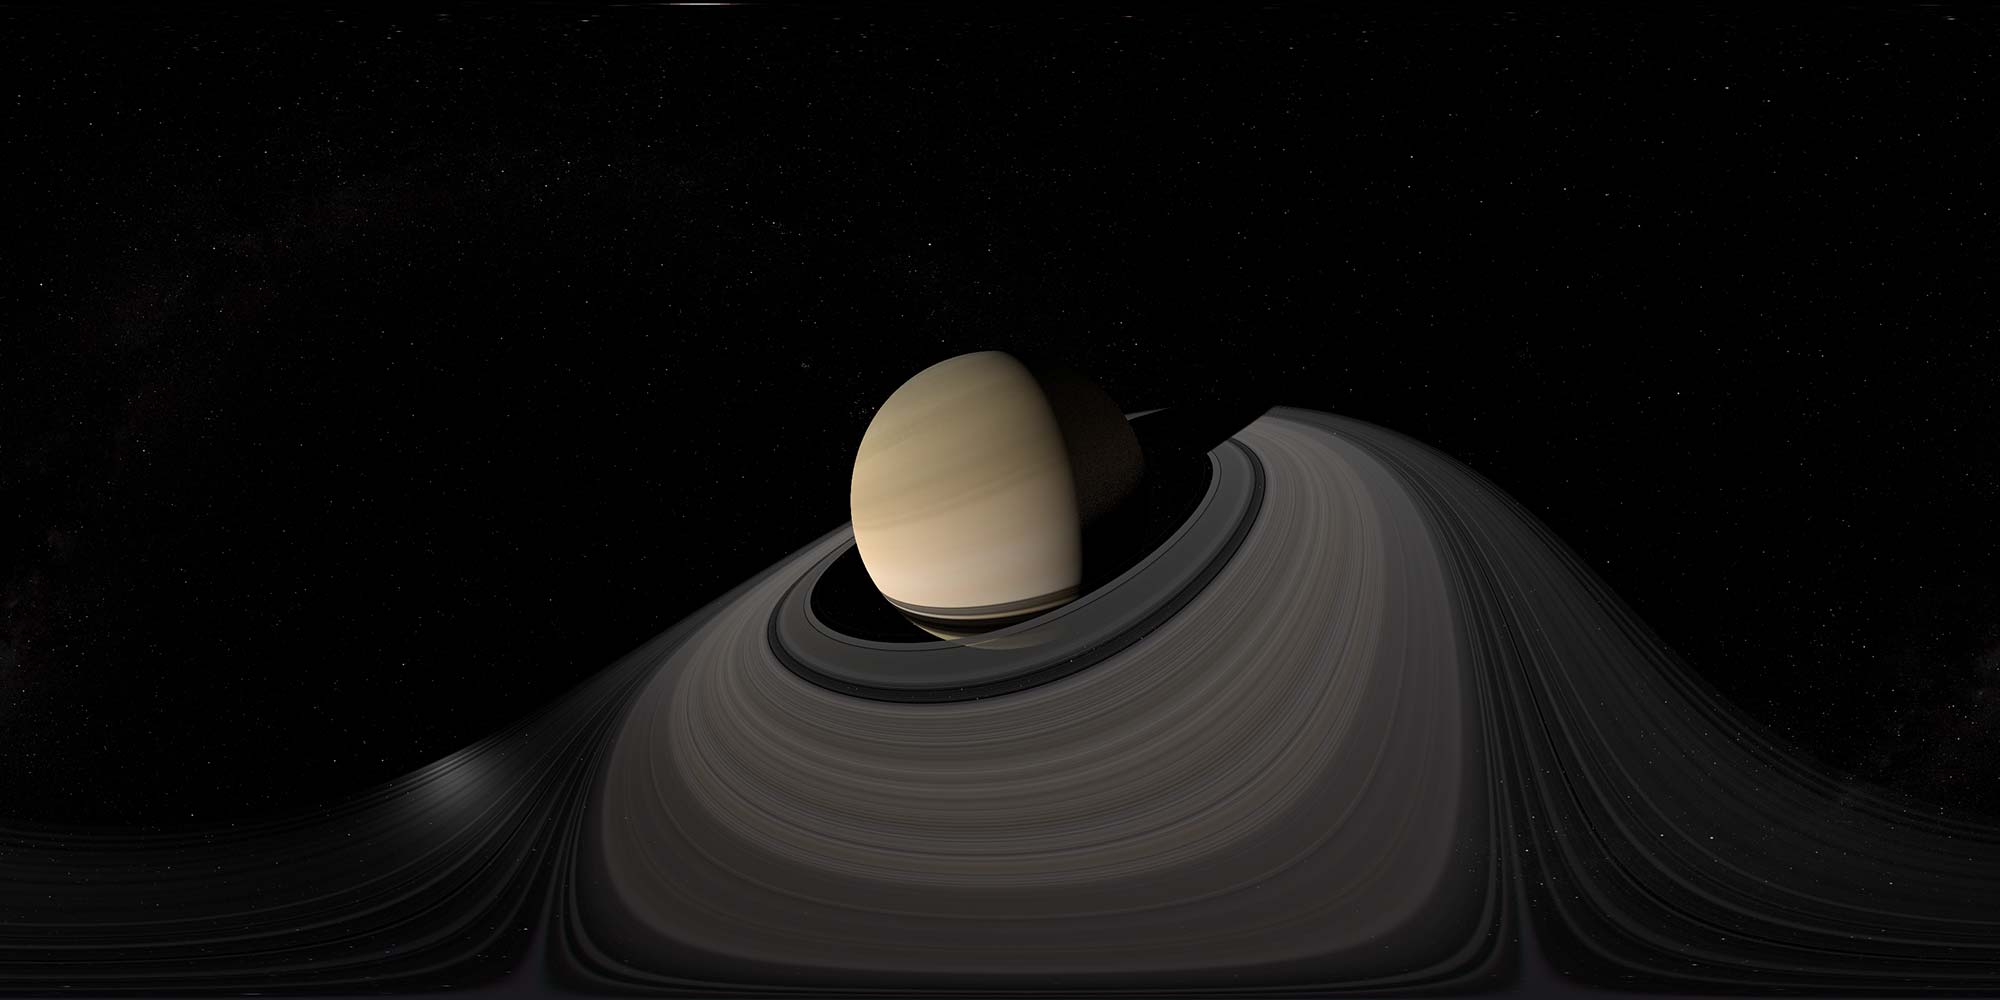 an image of saturn